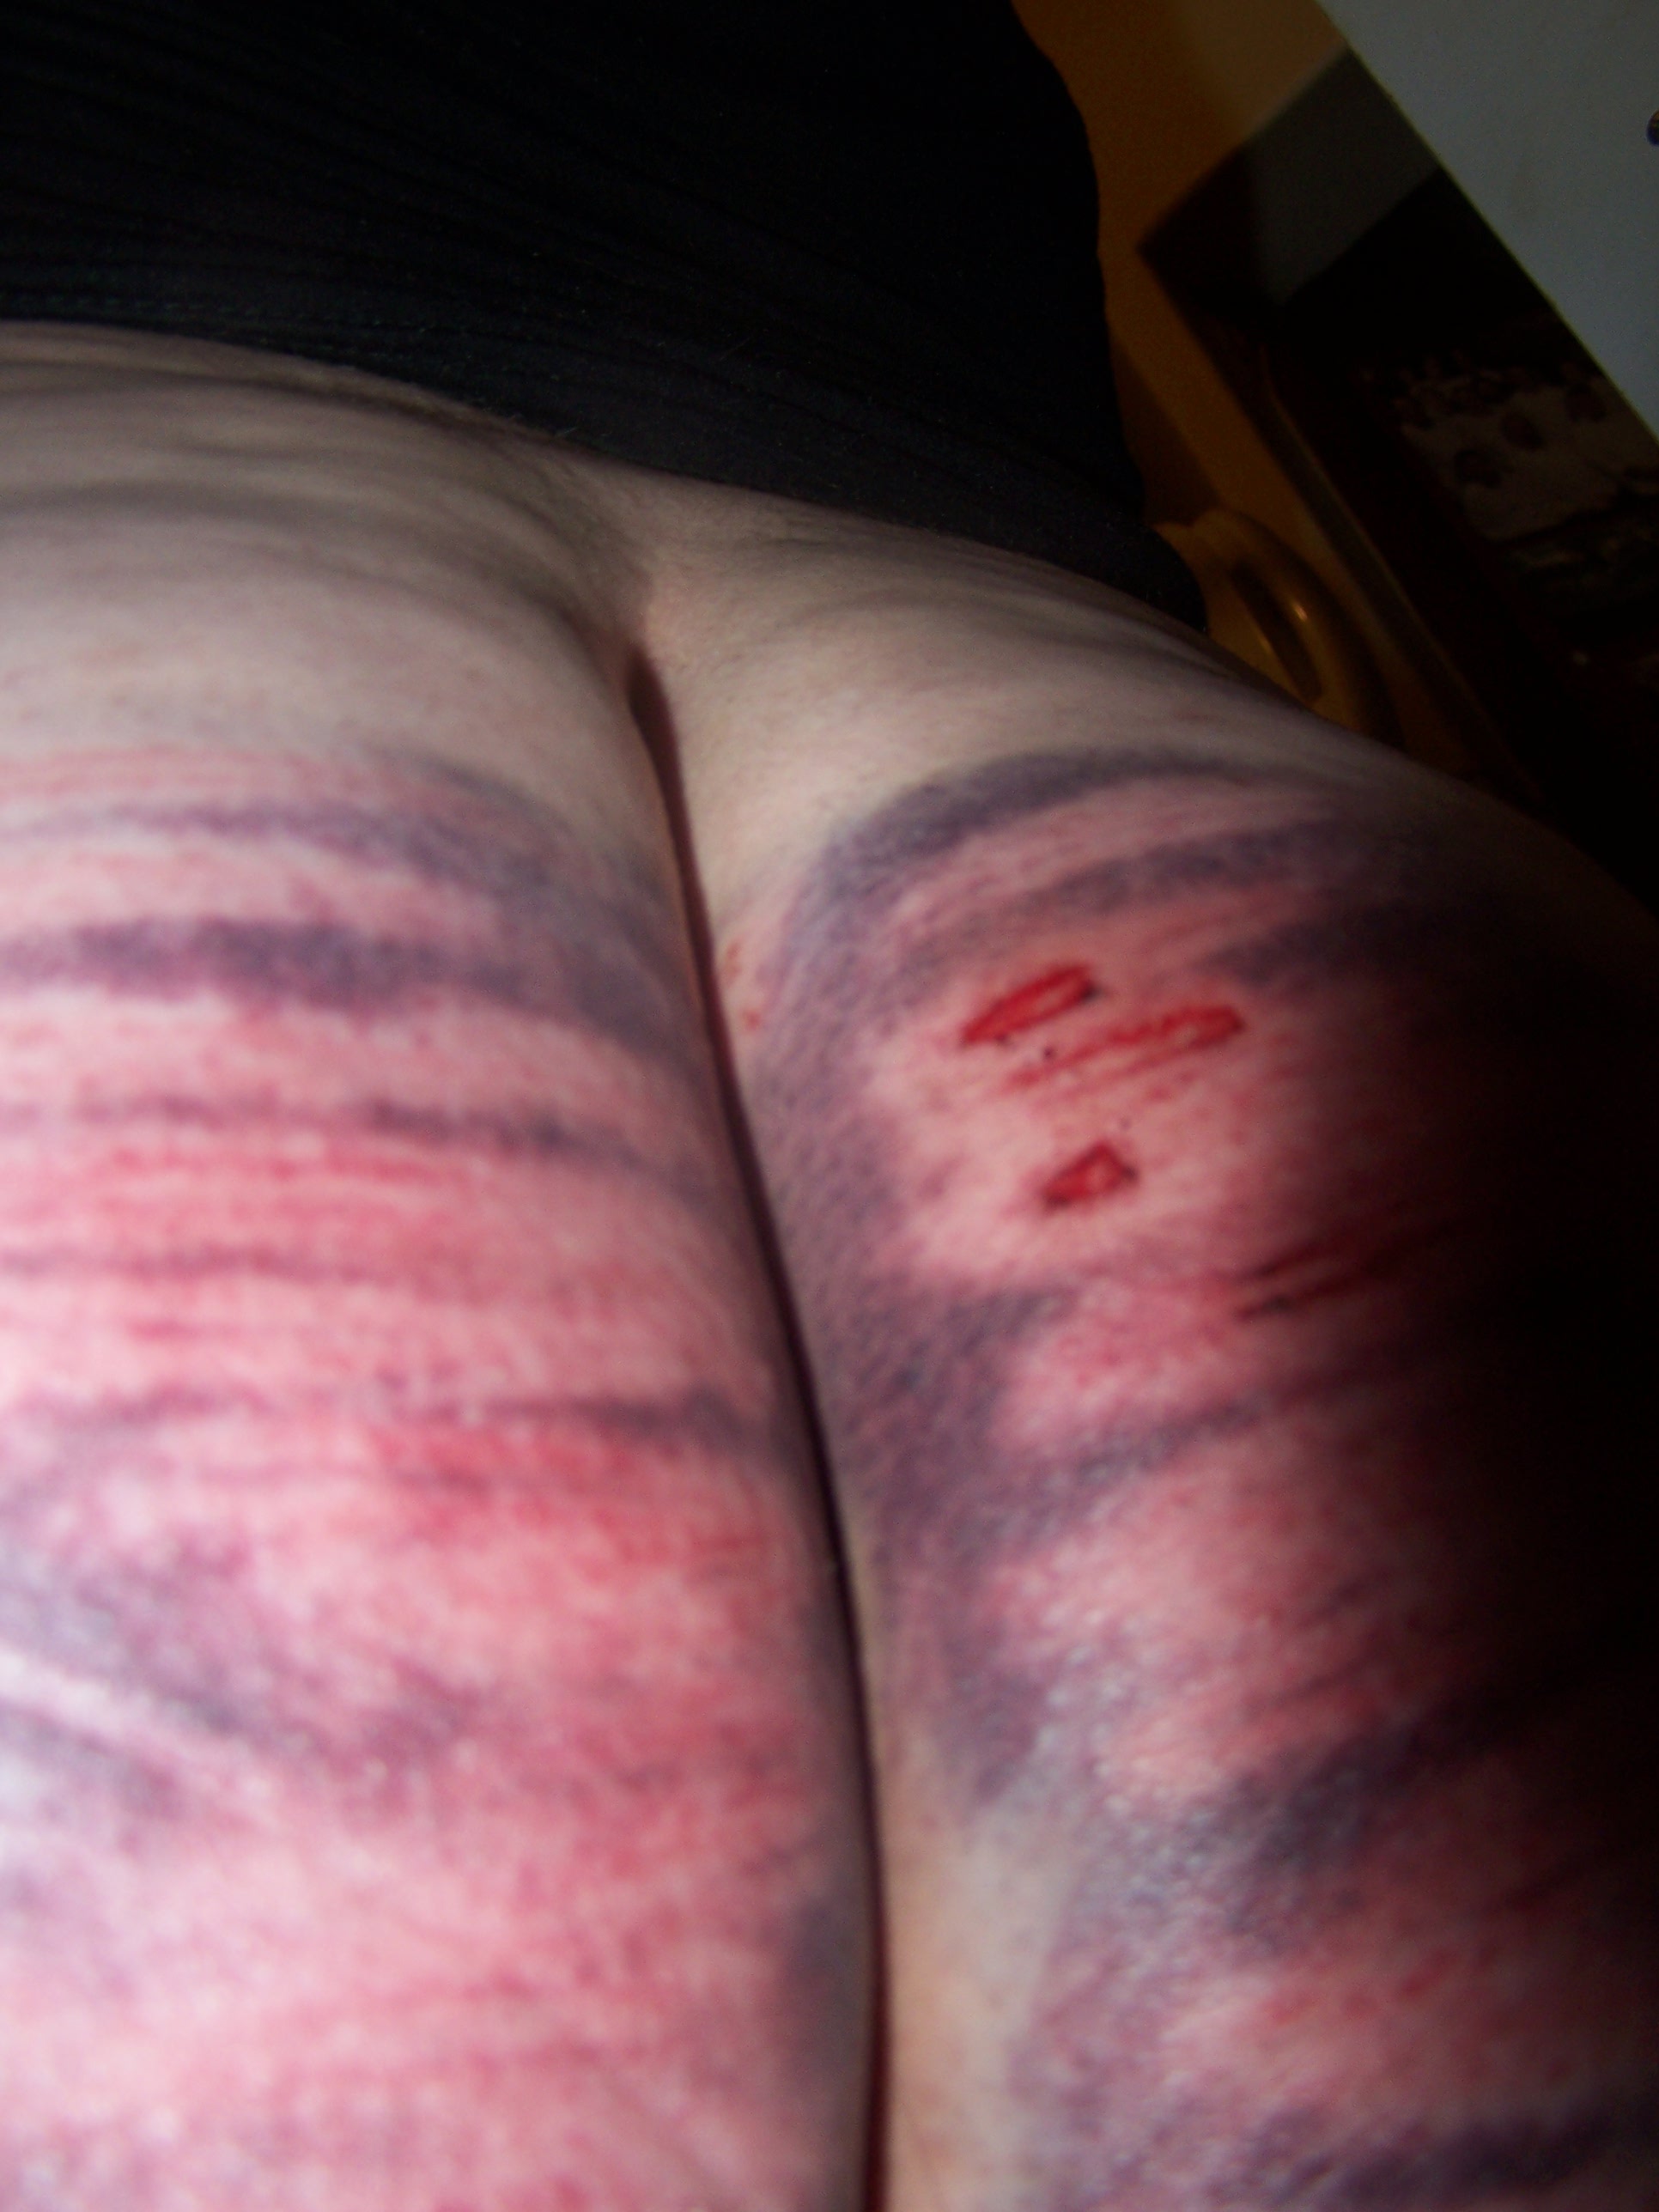 Caning Bdsm 94